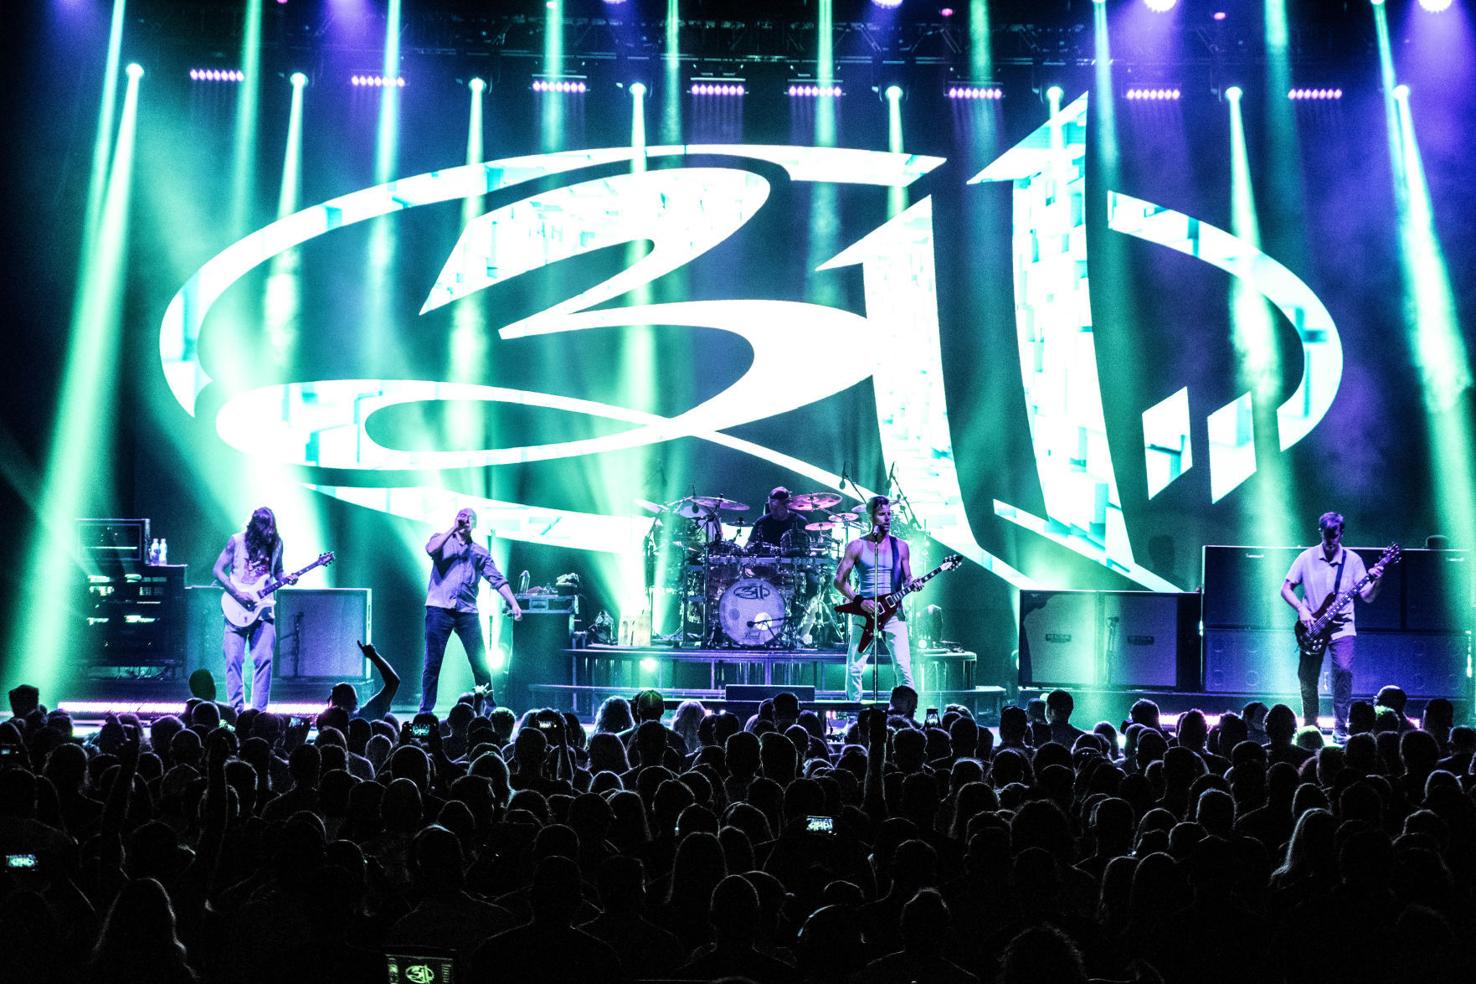 311 returning to Nebraska on 'Live From The Ride' tour